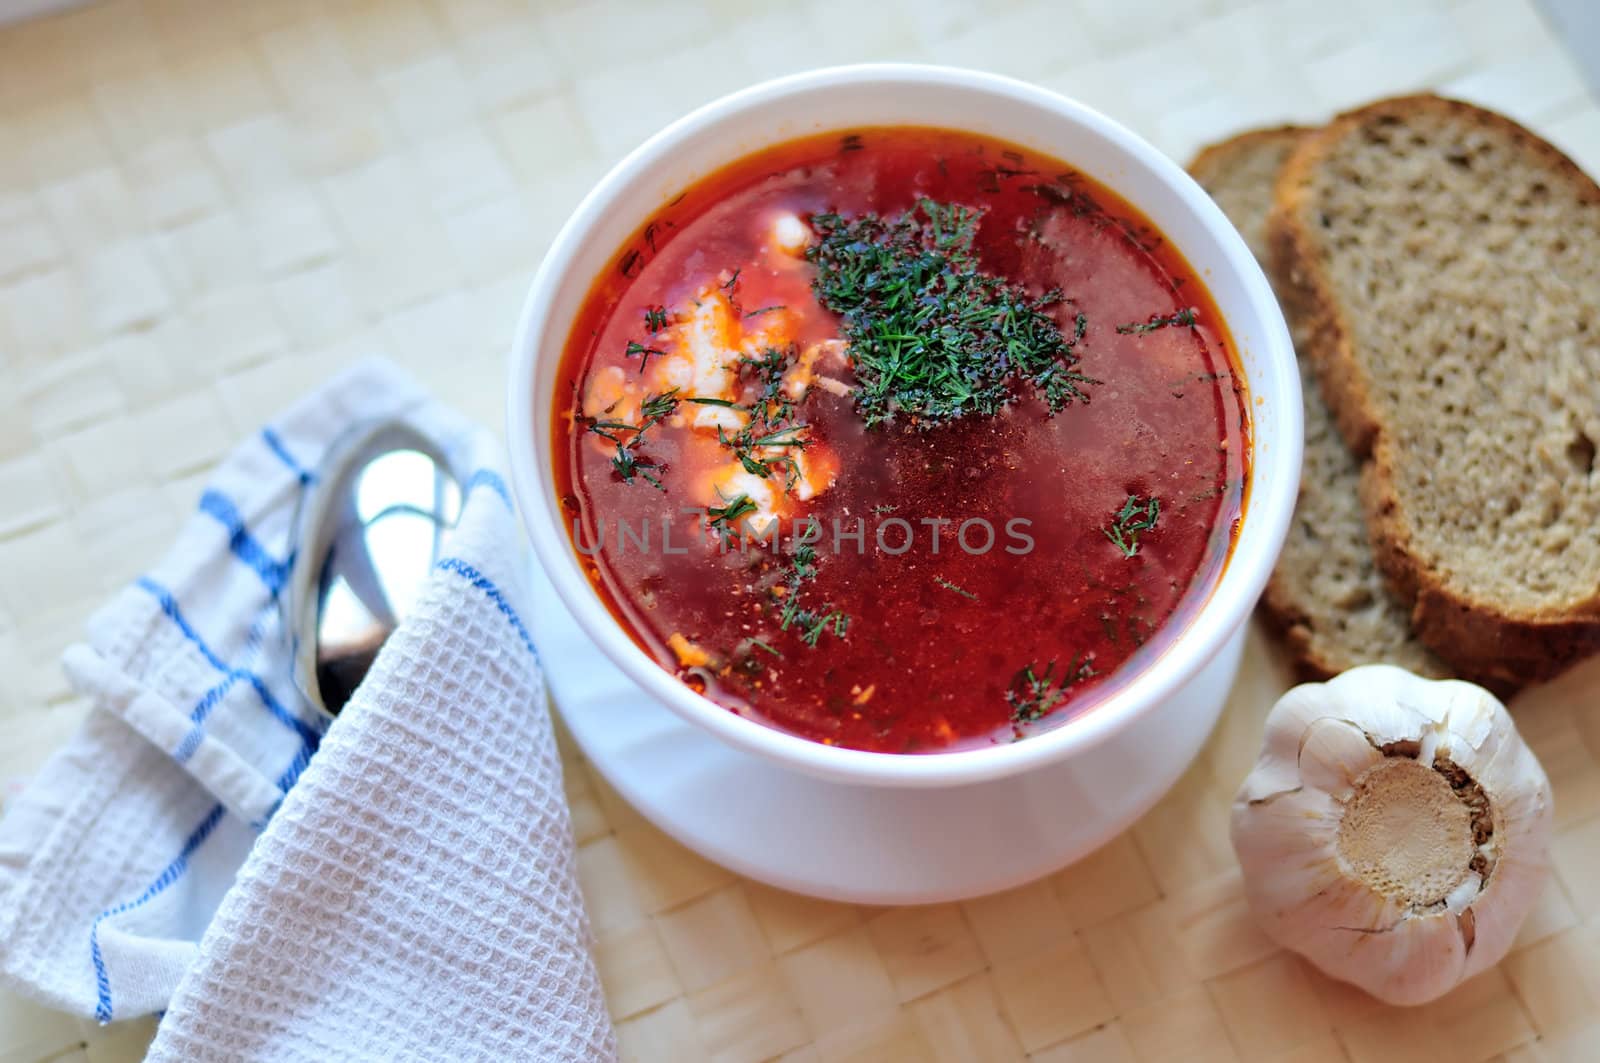 ukrainian and russian red-beet soup (borscht) with garlic and sour cream

